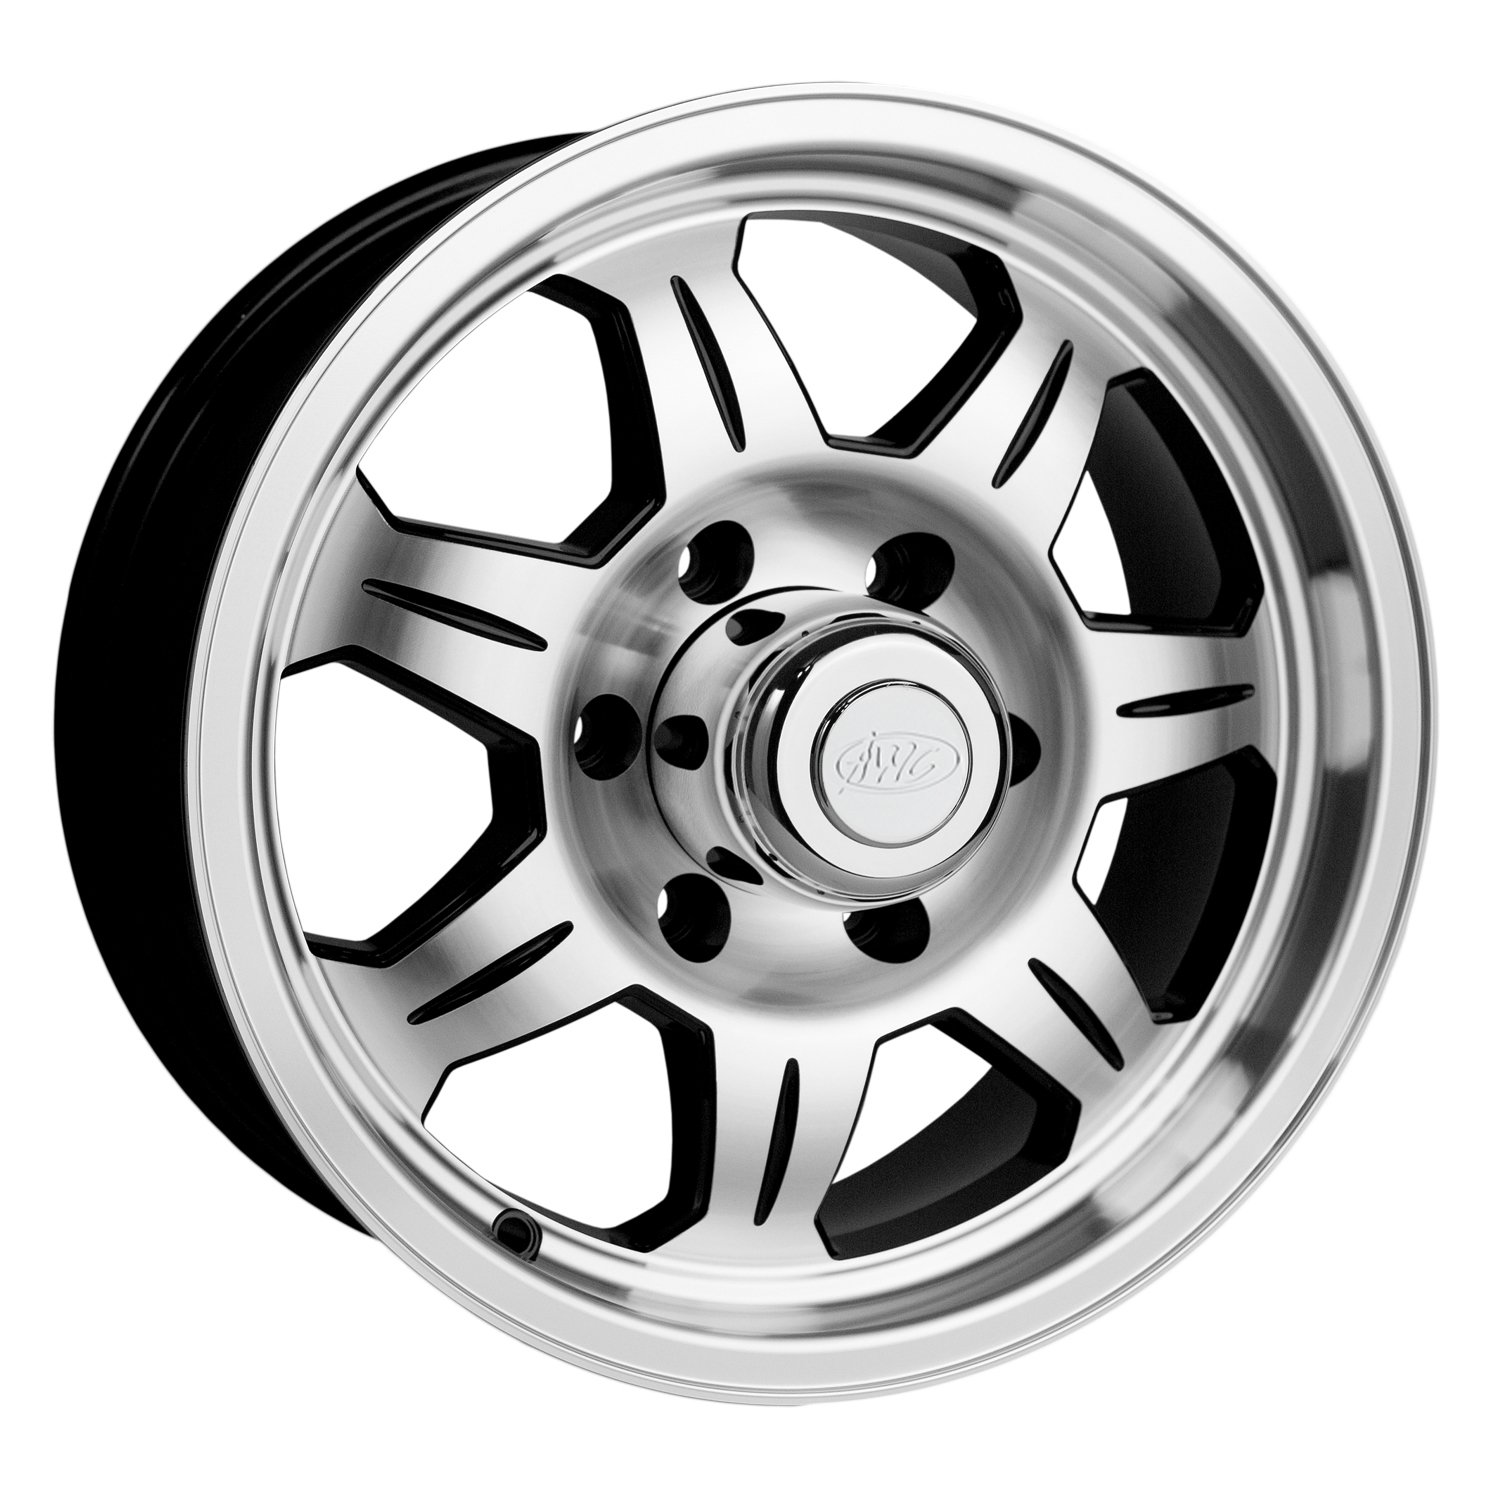 870 ELEMENT Trailer Wheel Size: 12 X 4" Bolt Pattern: 5 x 4.50" (114.30 mm) [Machined with Black Accents]